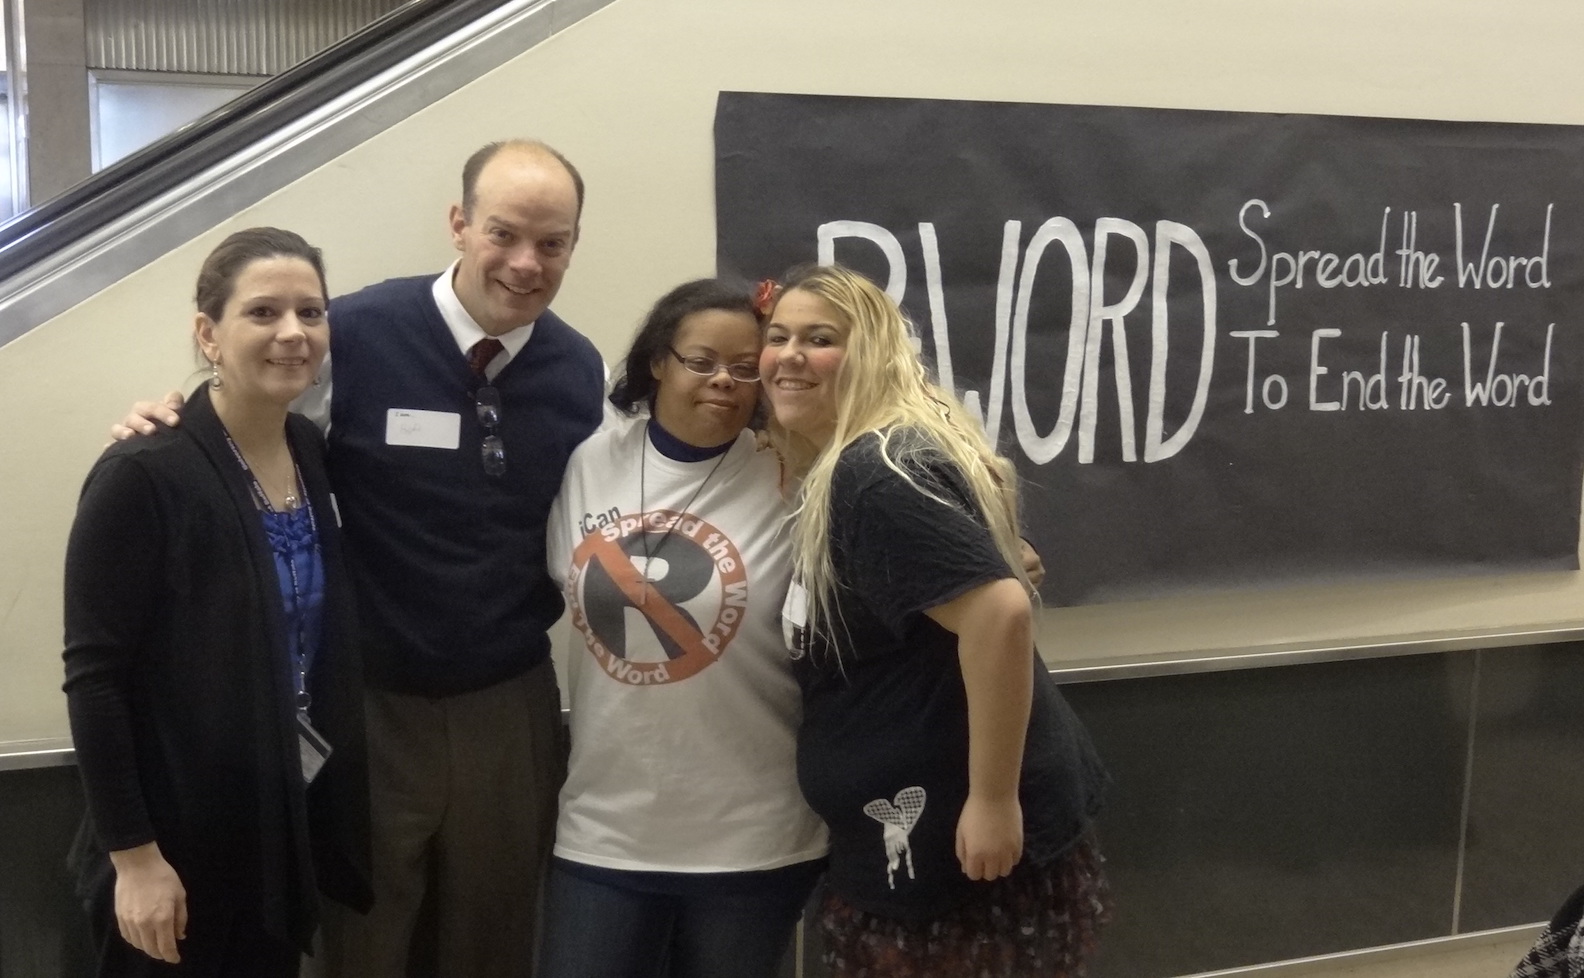 Executive Director of the Erie County Office for the Disabled Frank Cammarata (center, with nametag) is joined by Brie Kishel of the UB Alberti Center (left) and members of the iCan Clothing Co. and Unique Productions at Friday's community forum to `Spread the Word to End the Word.`